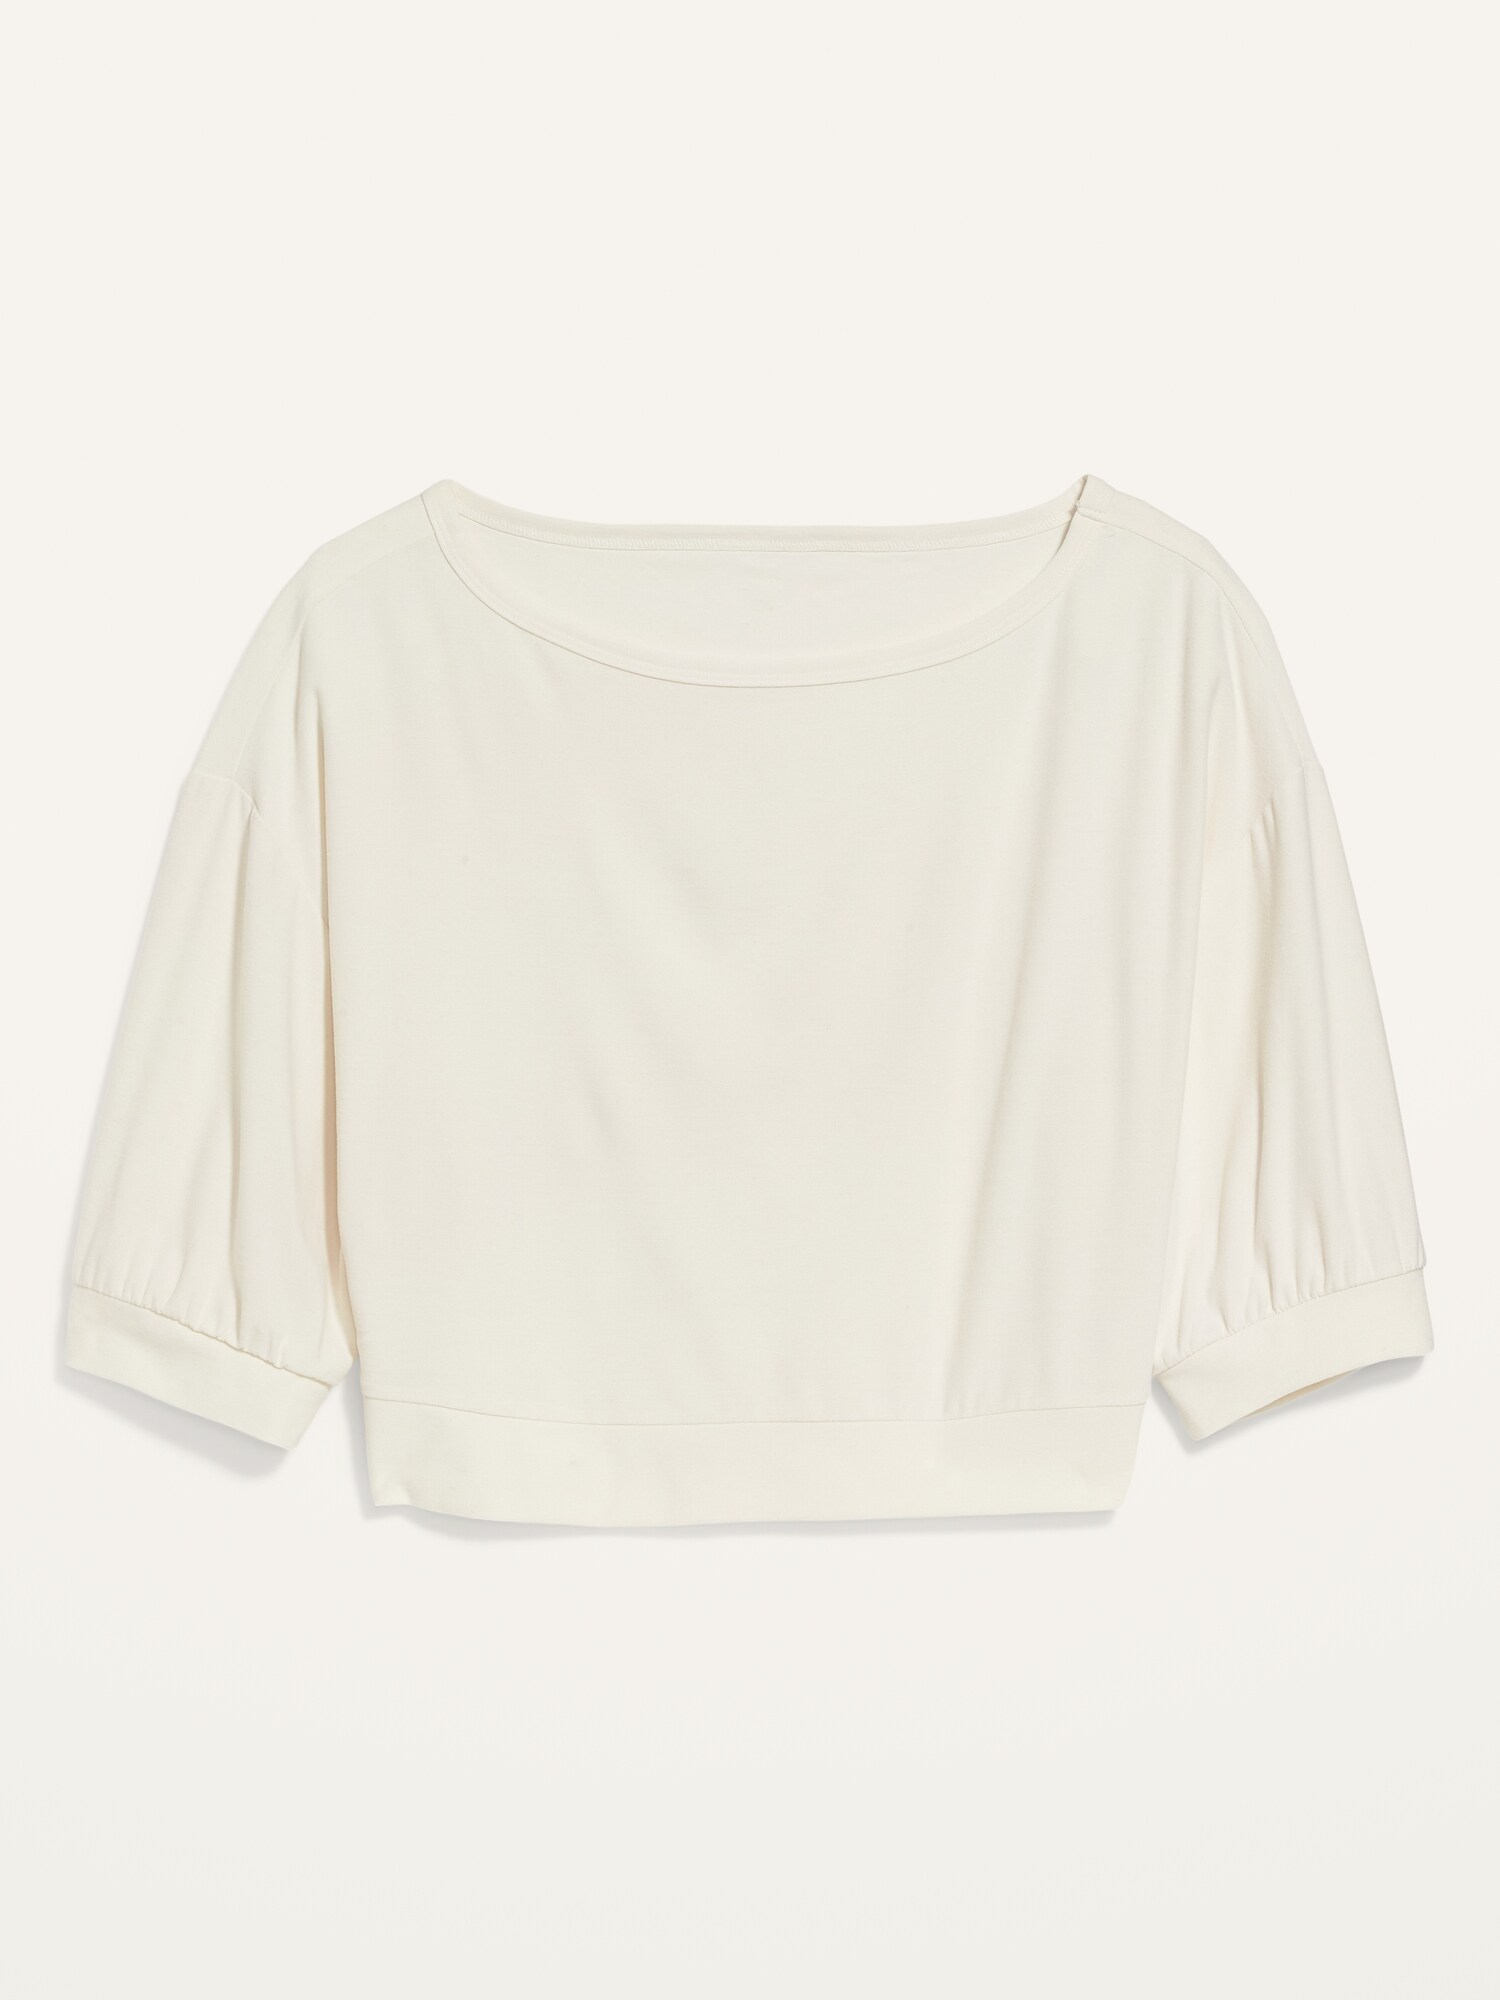 Breathe ON Cropped Elbow-Sleeve Performance Top for Women | Old Navy